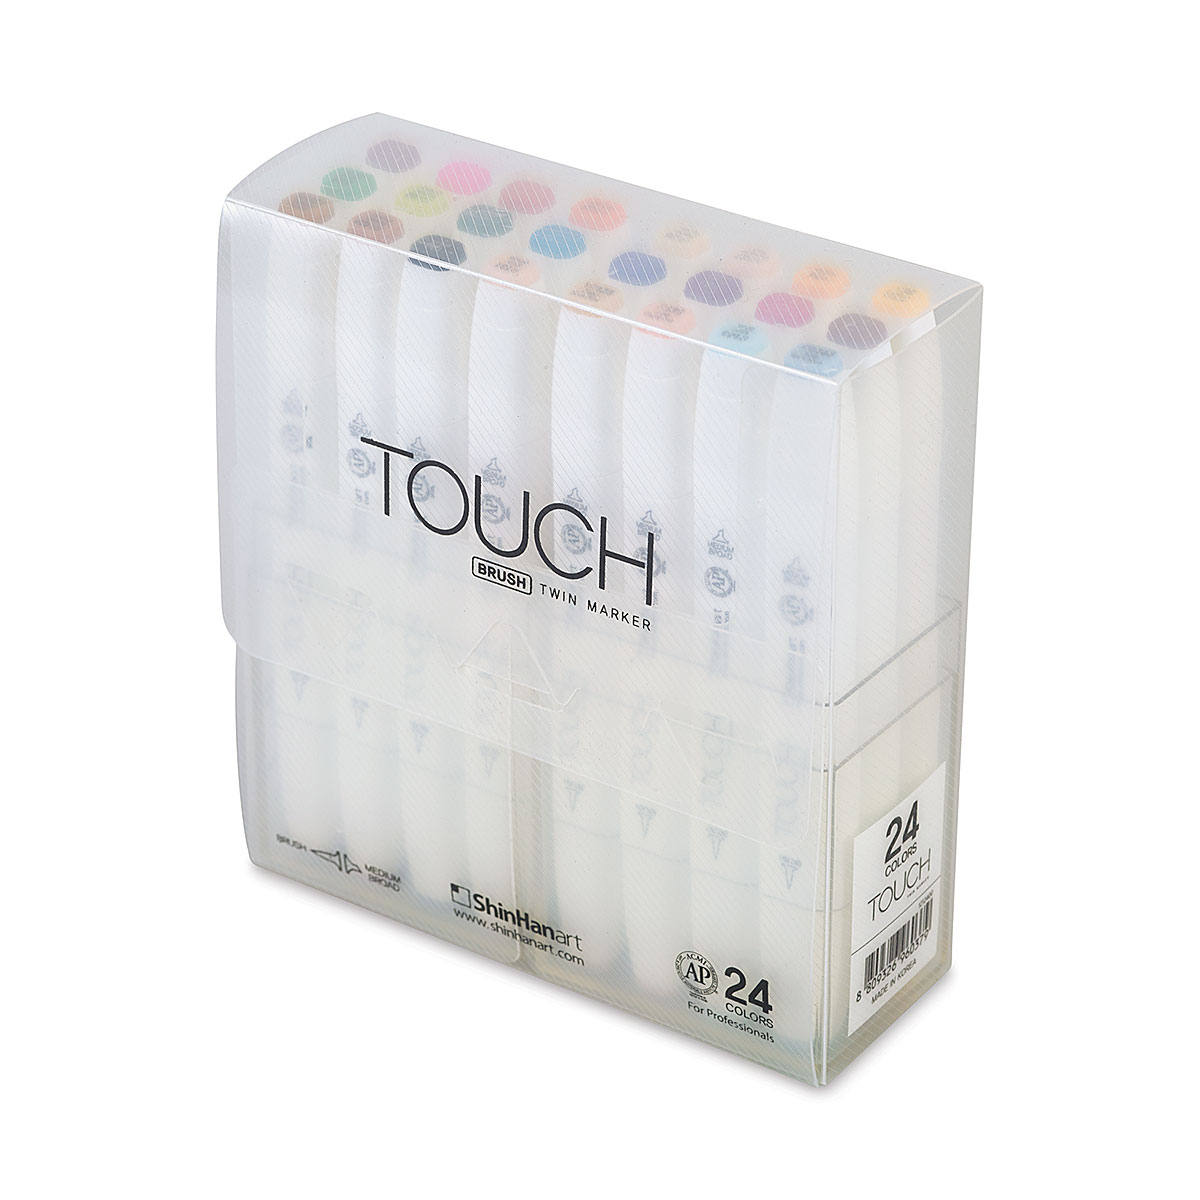 Back to School Limited Edition Shinhan Touch Twin Brush Marker 204